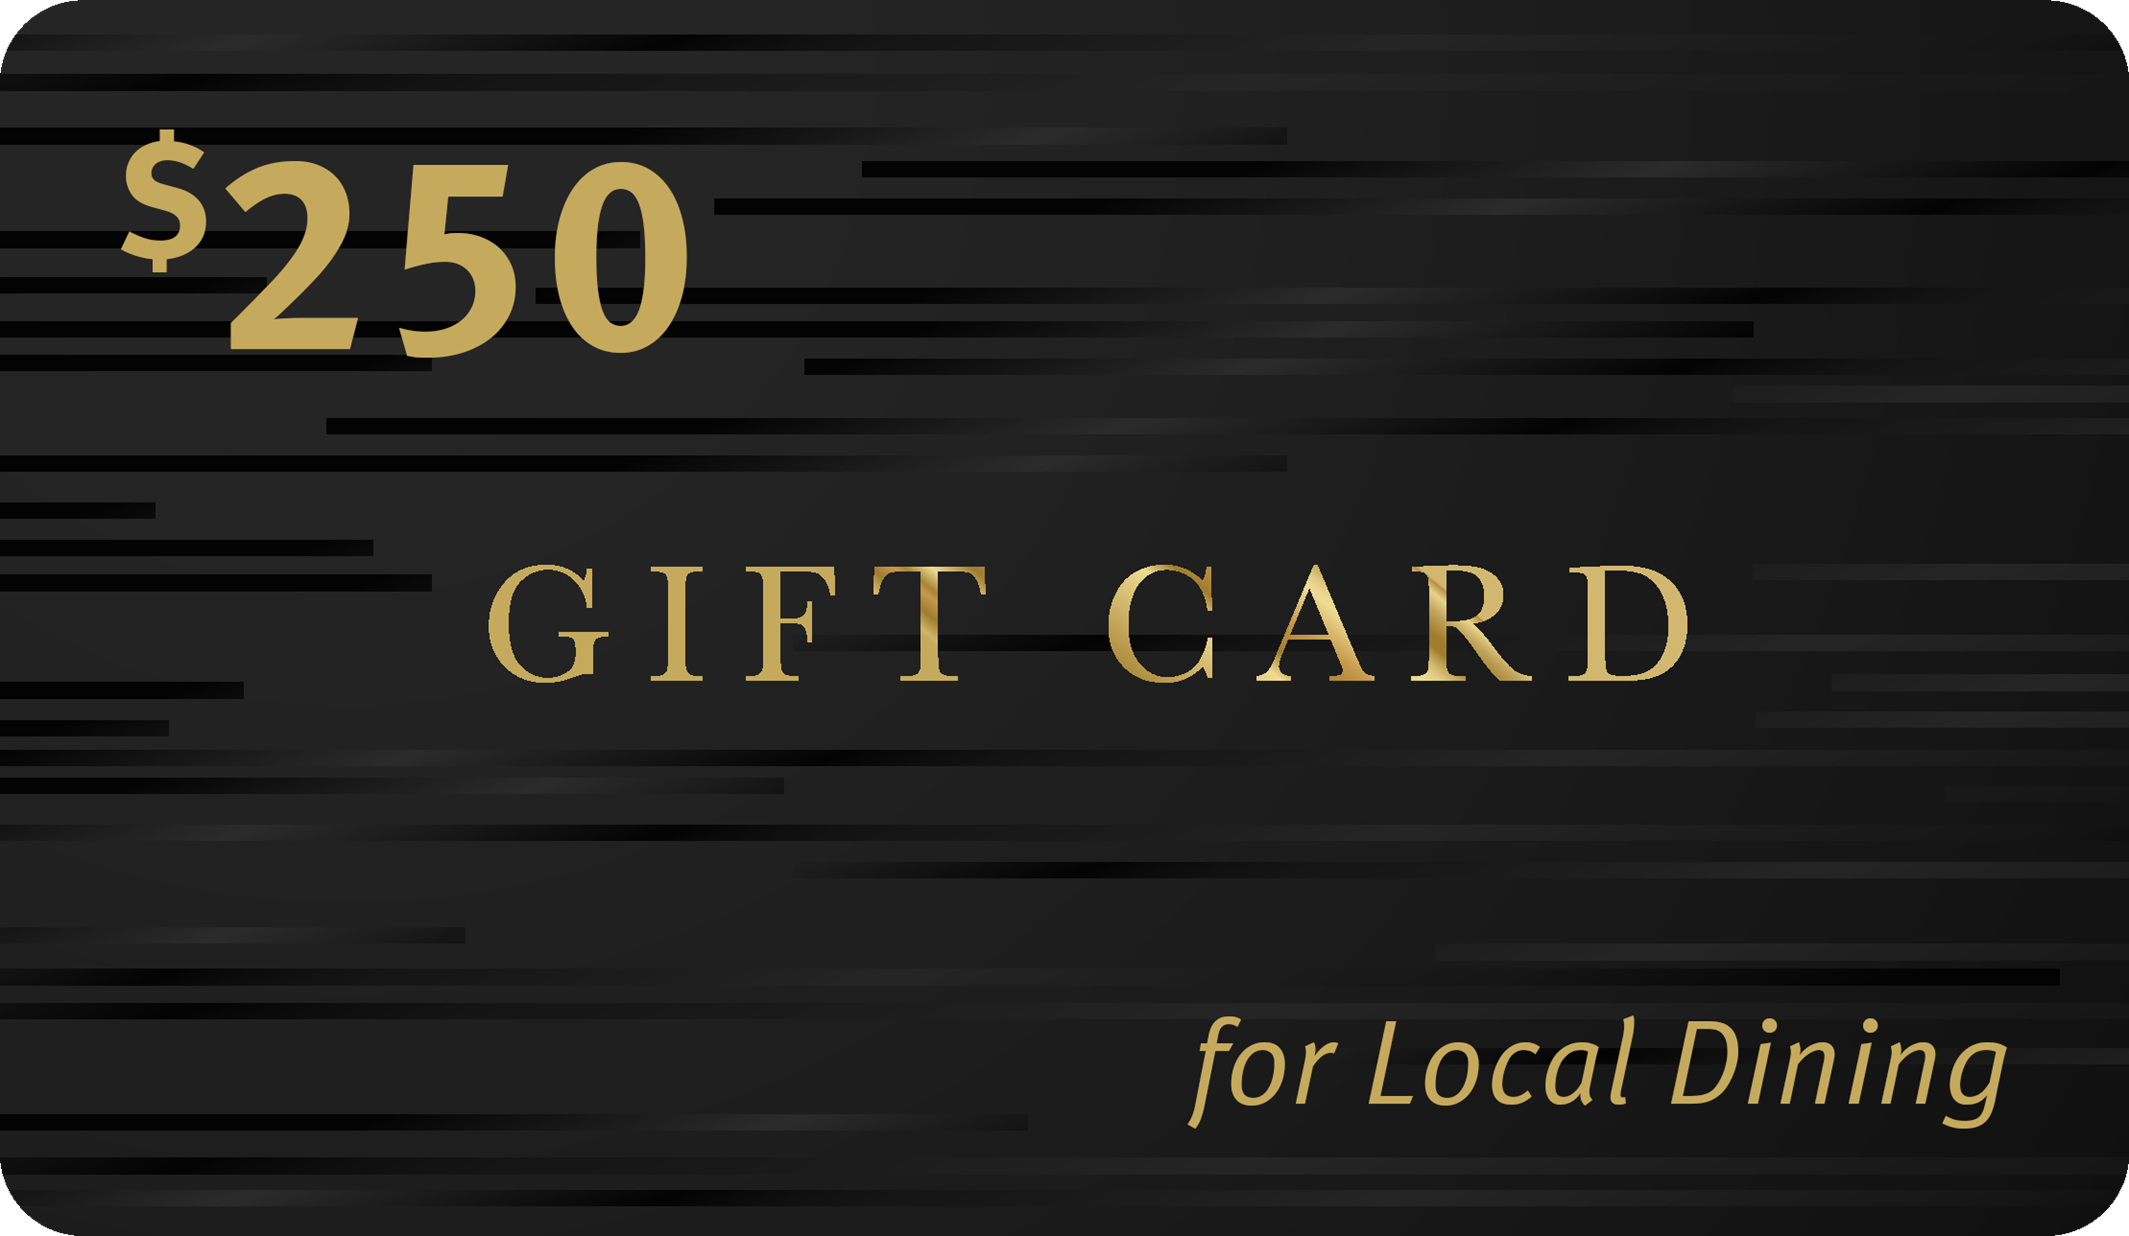 Local Dining Gift Card